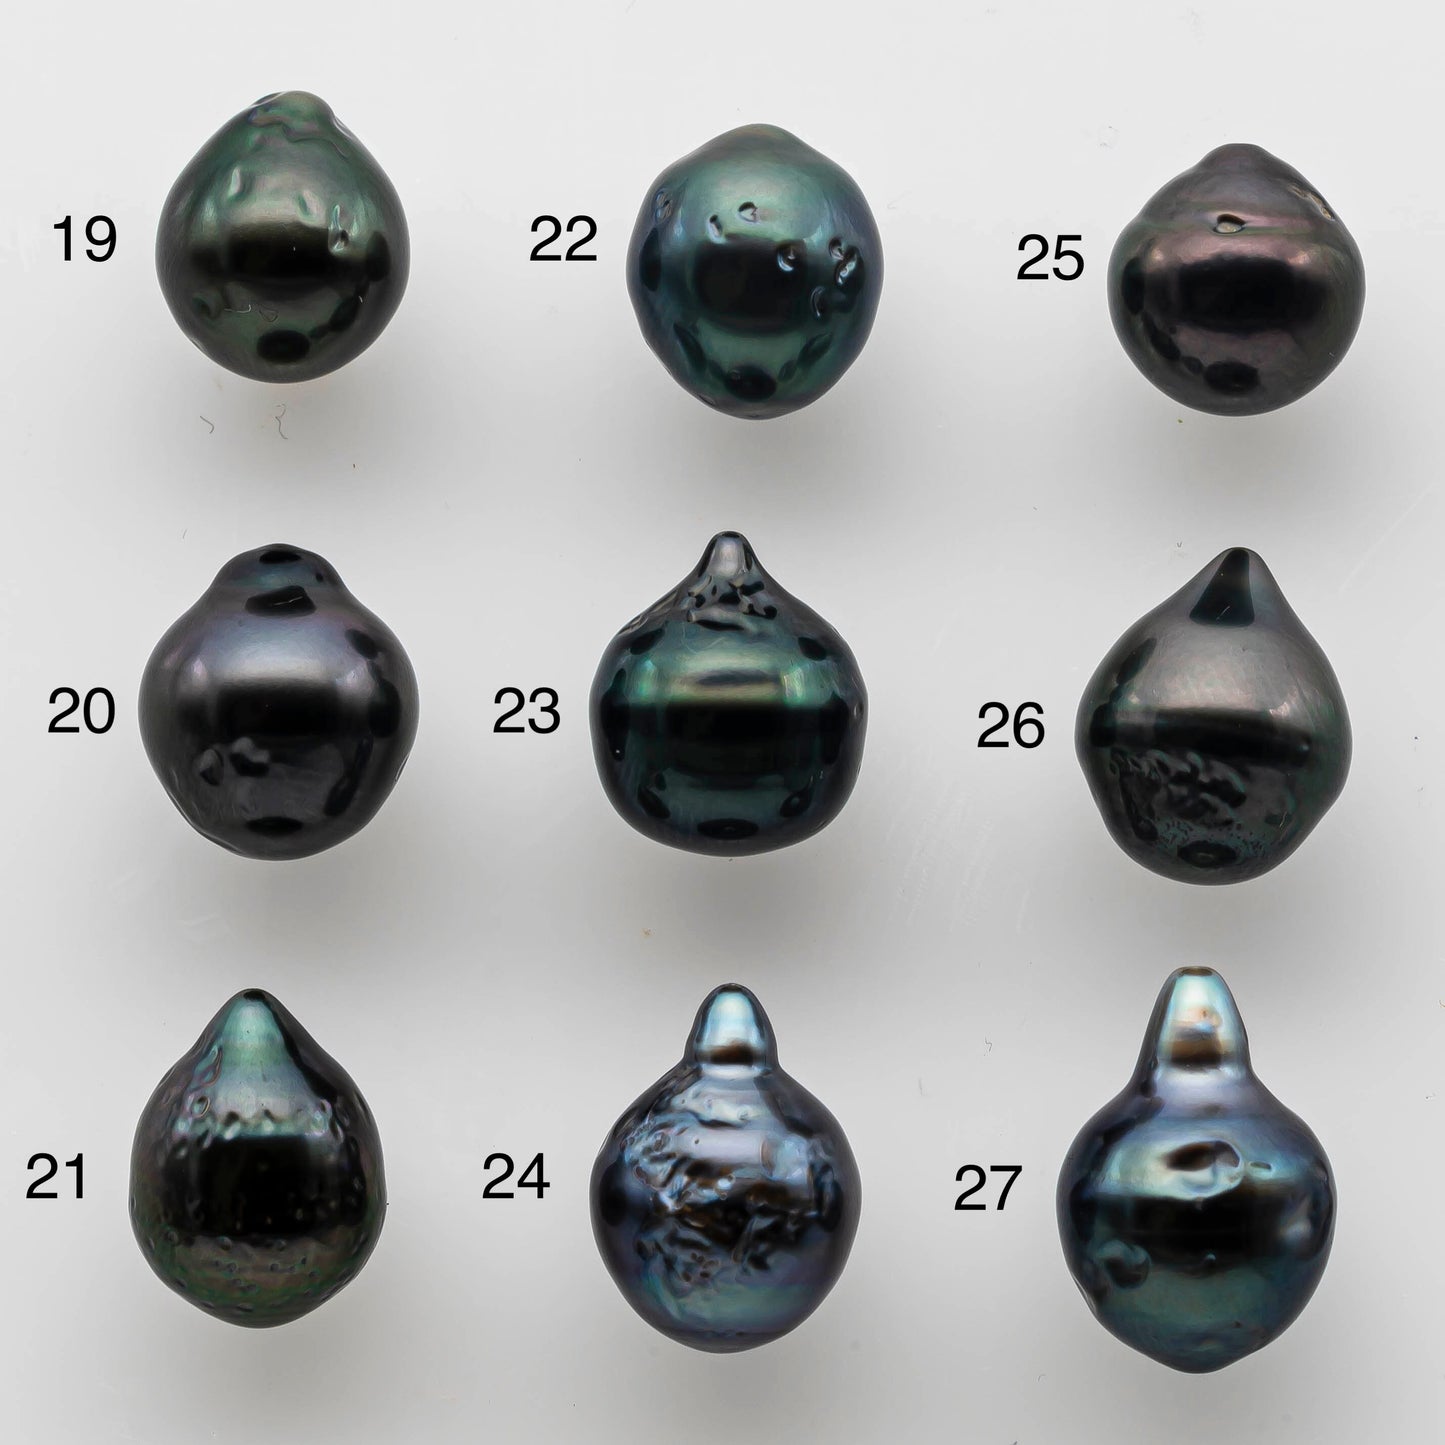 9-10mm Loose Tahitian Pearl Teardrops Undrilled Single Piece in High Luster and Natural Color with Blemishes, SKU #1470TH